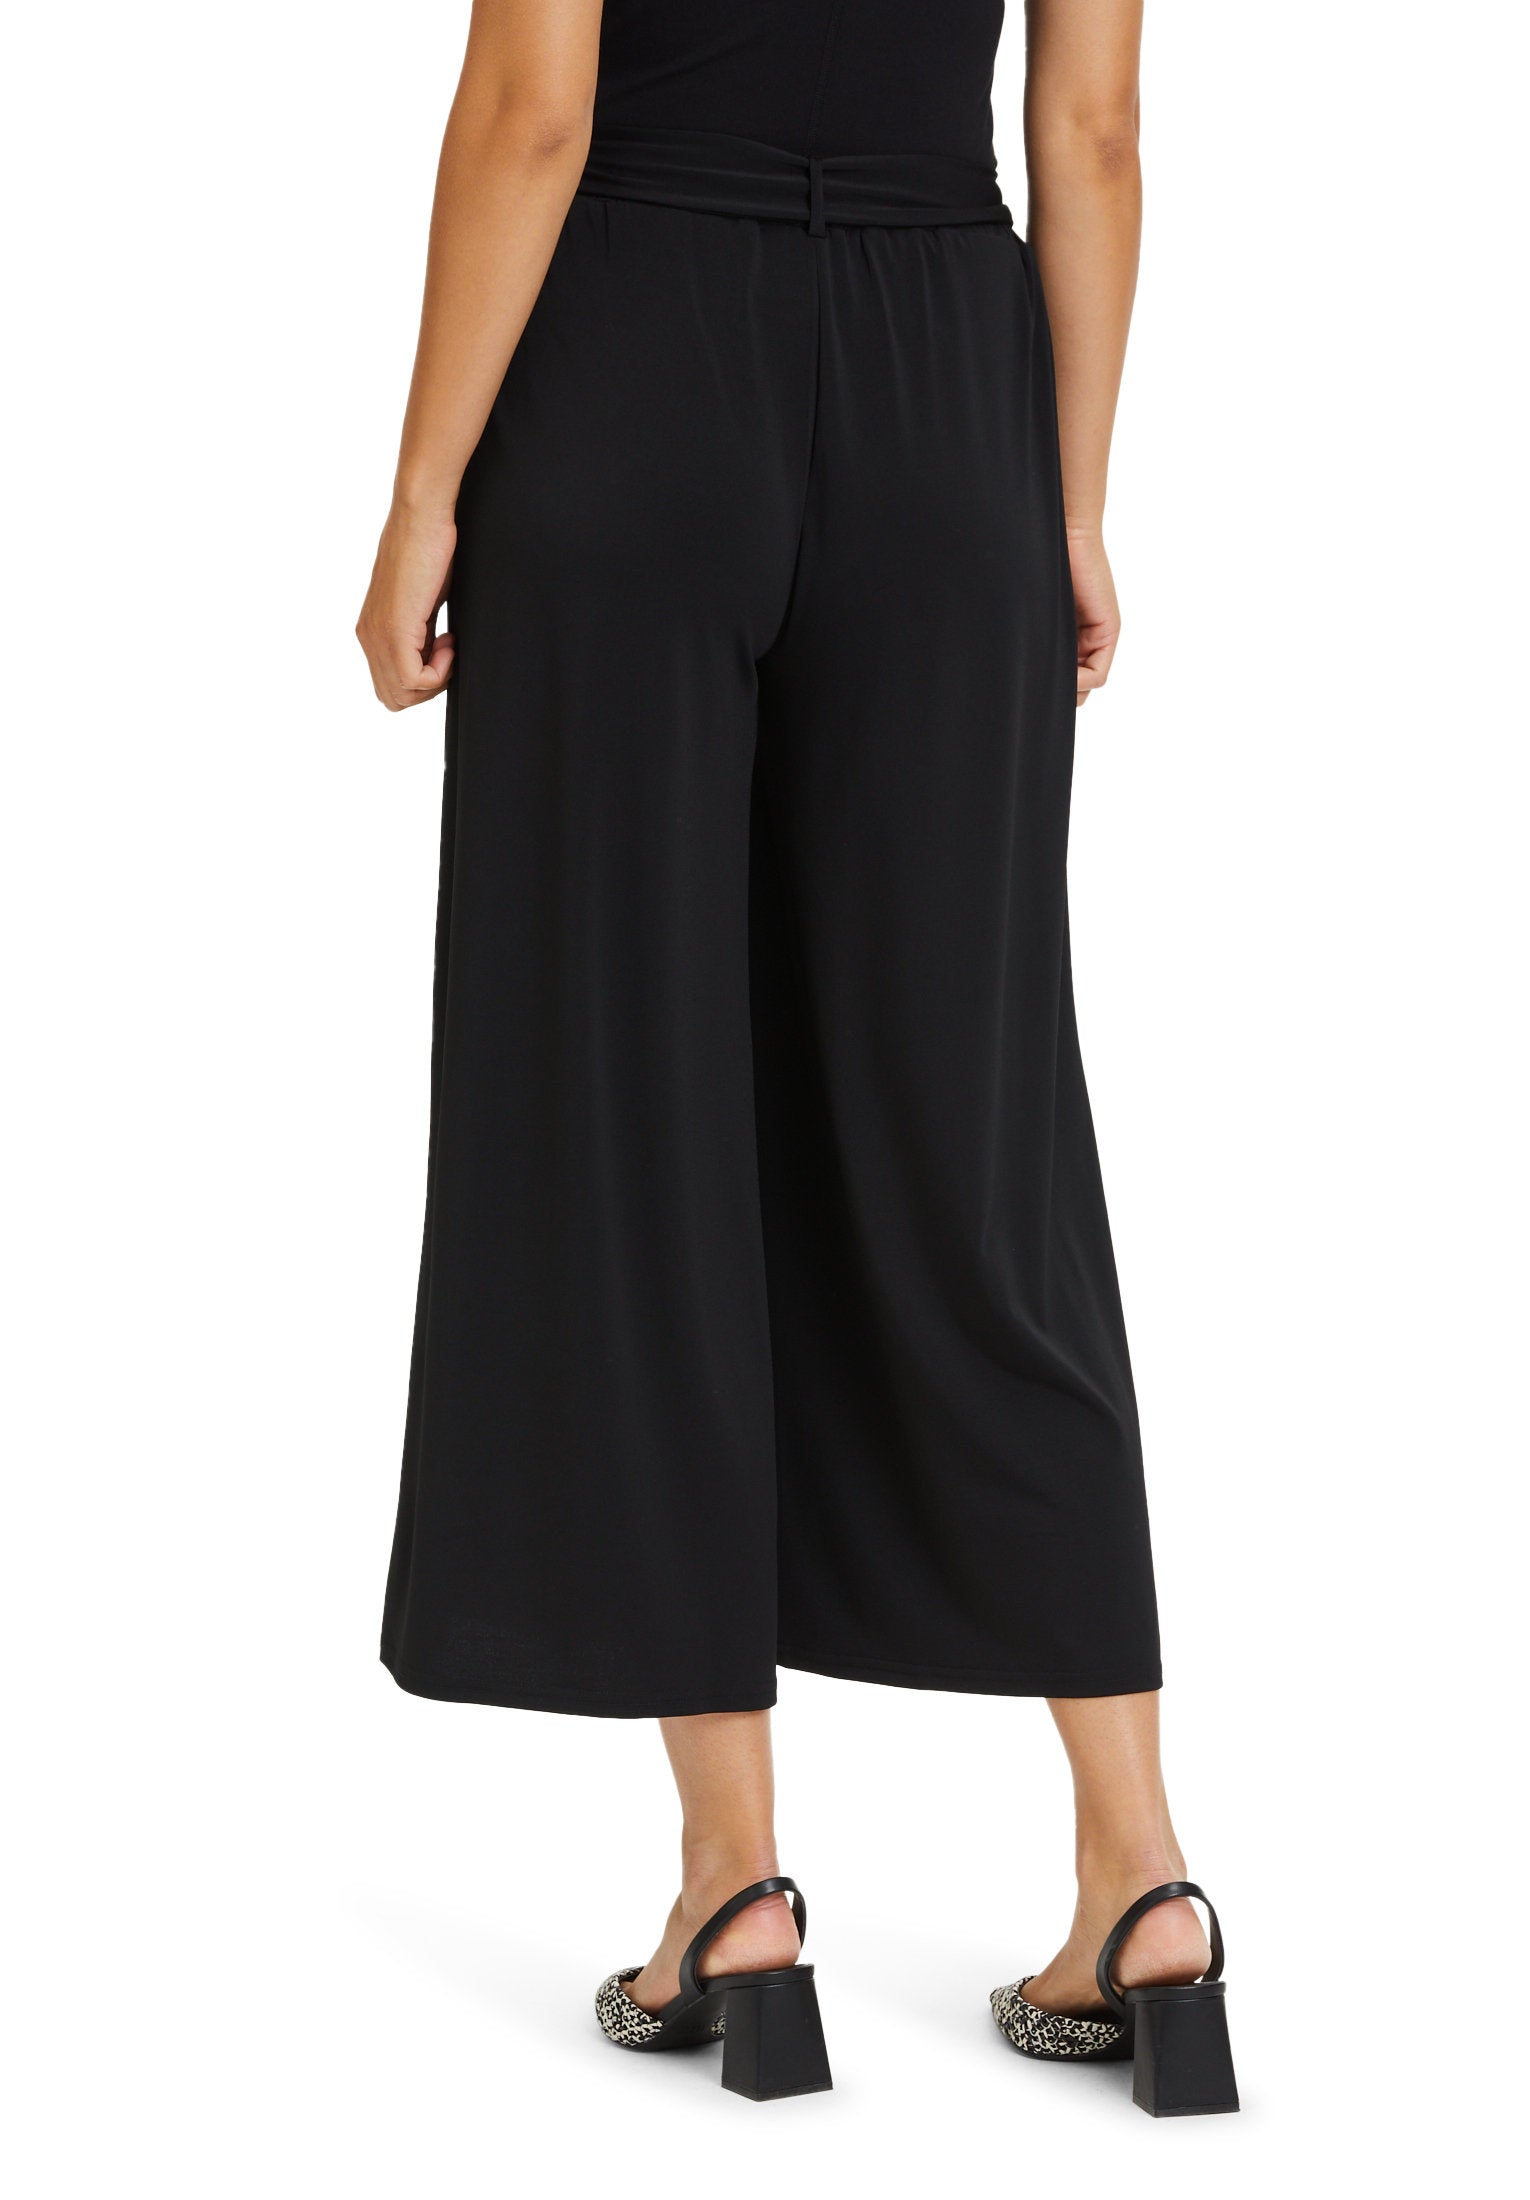 Culottes With Elastic Waistband_6808-1217_9045_04